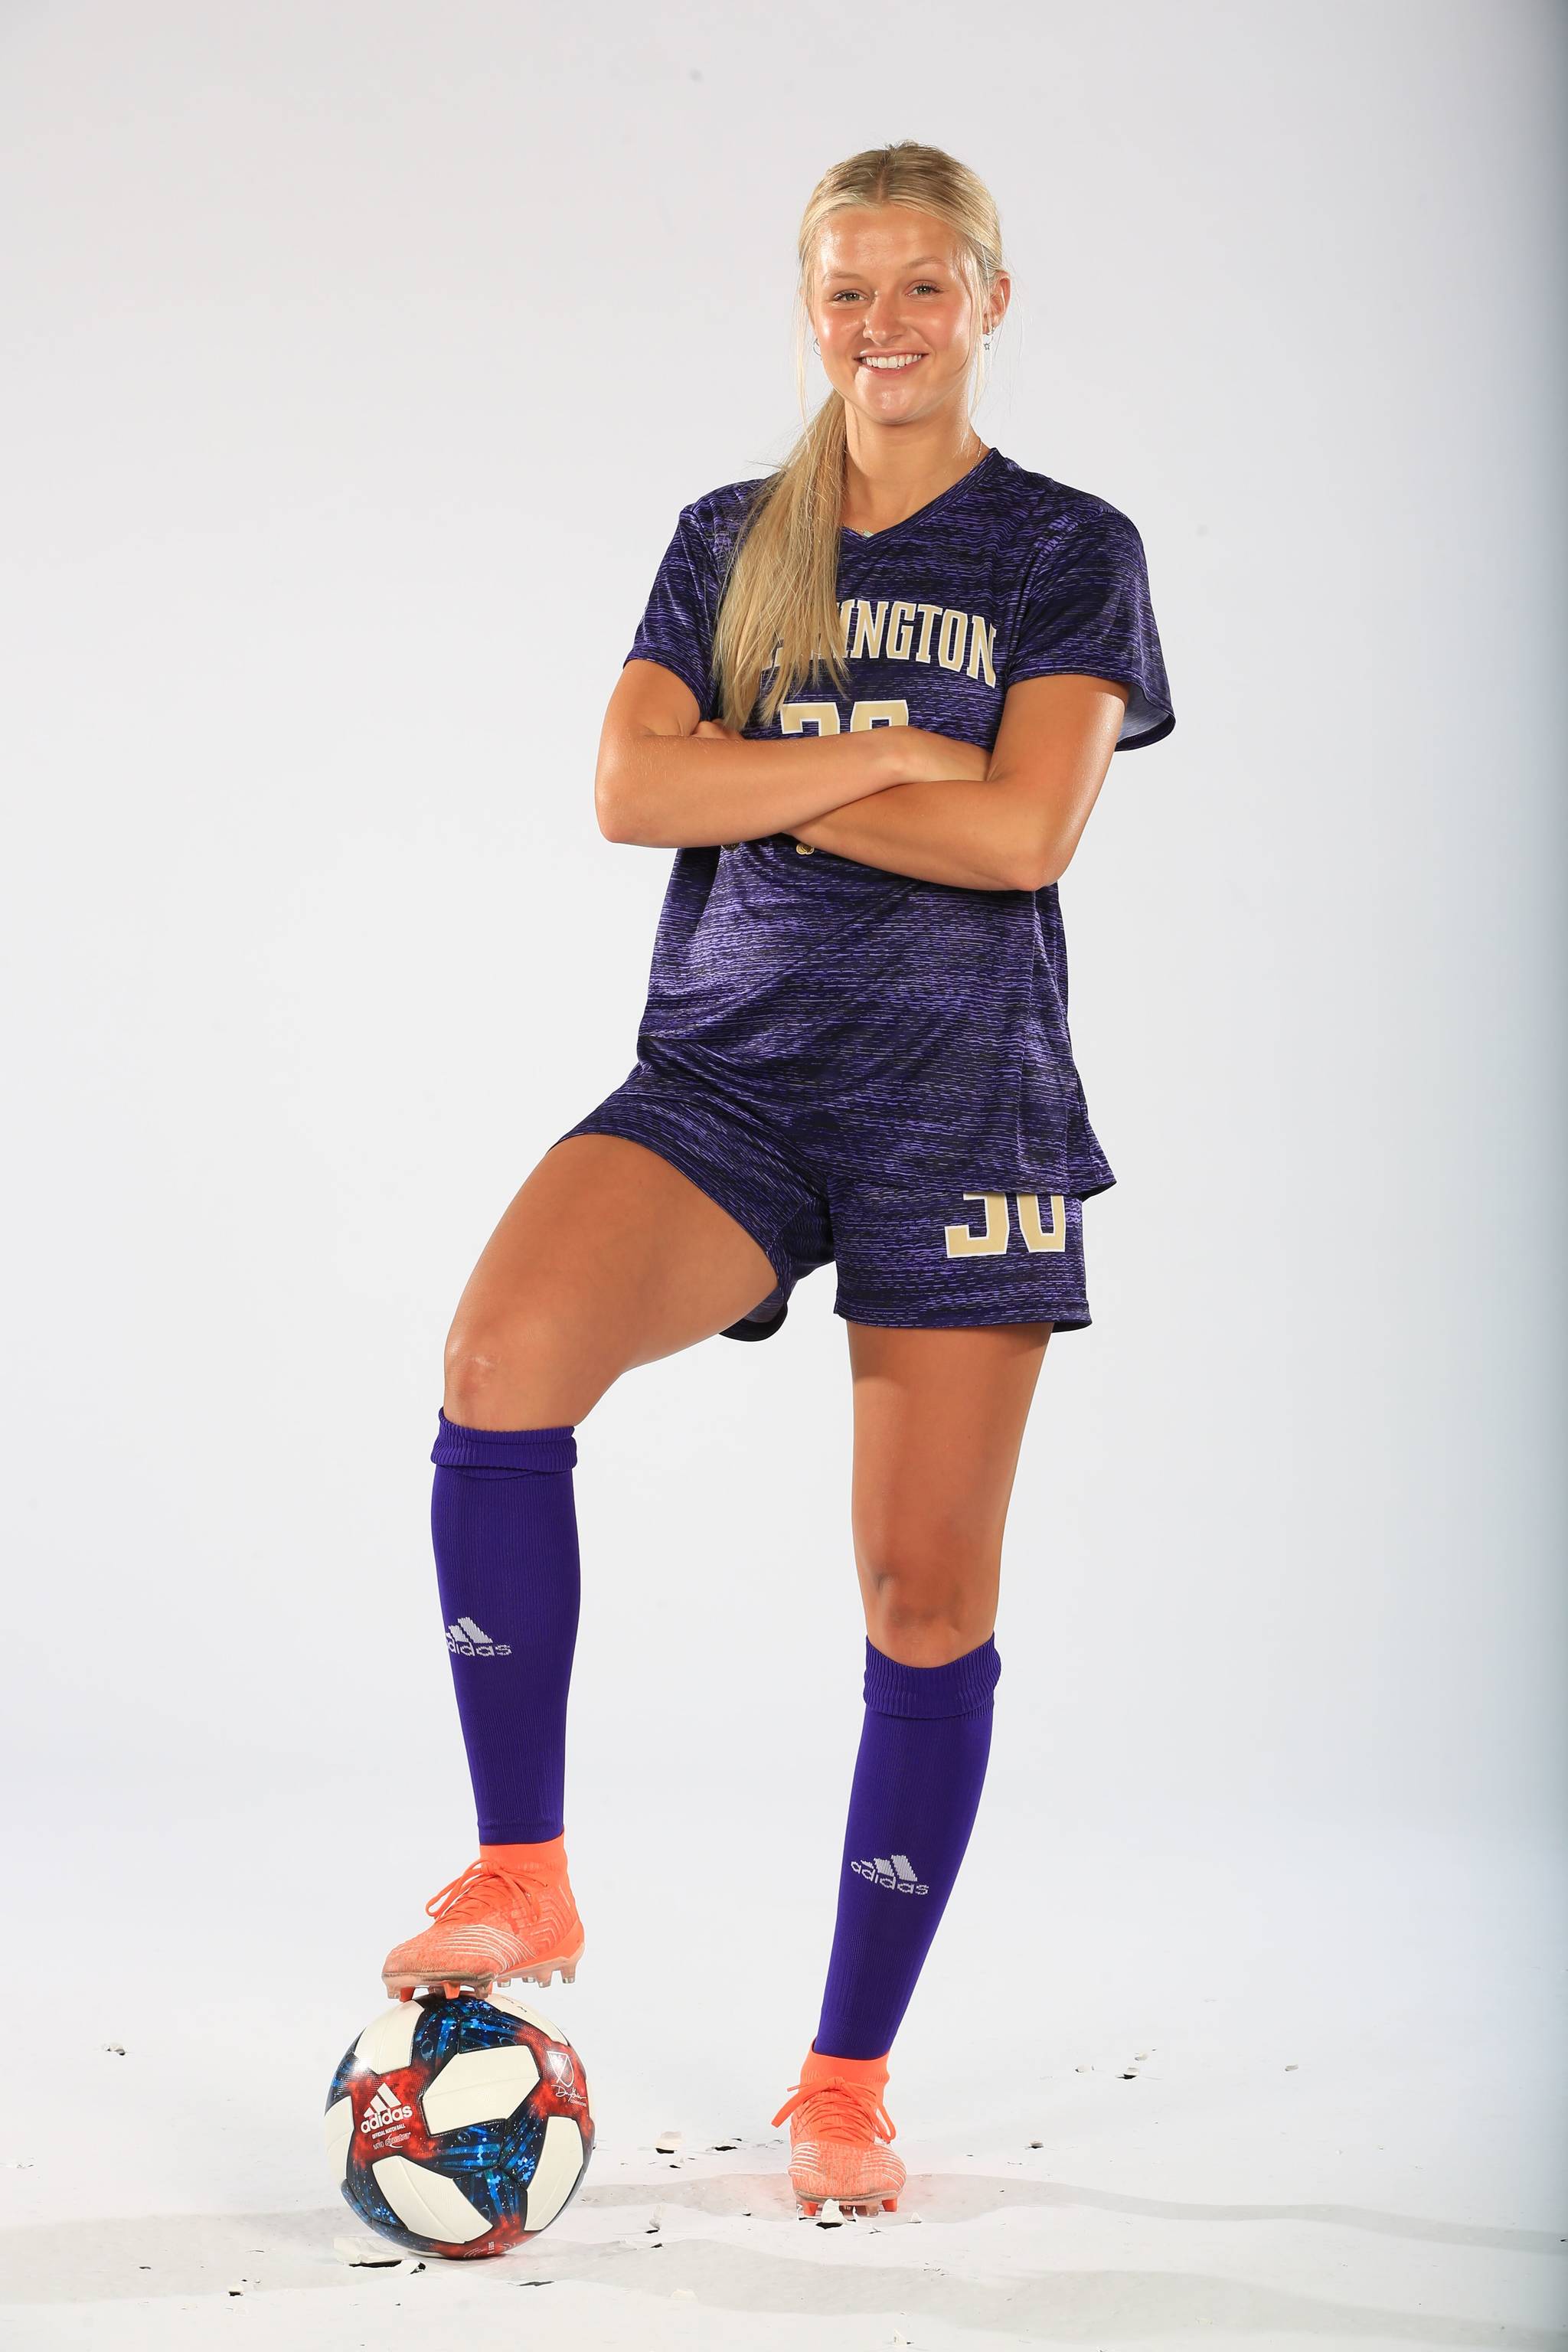 Karlee Stueckle, a sophomore track and field athlete at the University of Washington, has joined the Huskies women’s soccer team. Courtesy photo